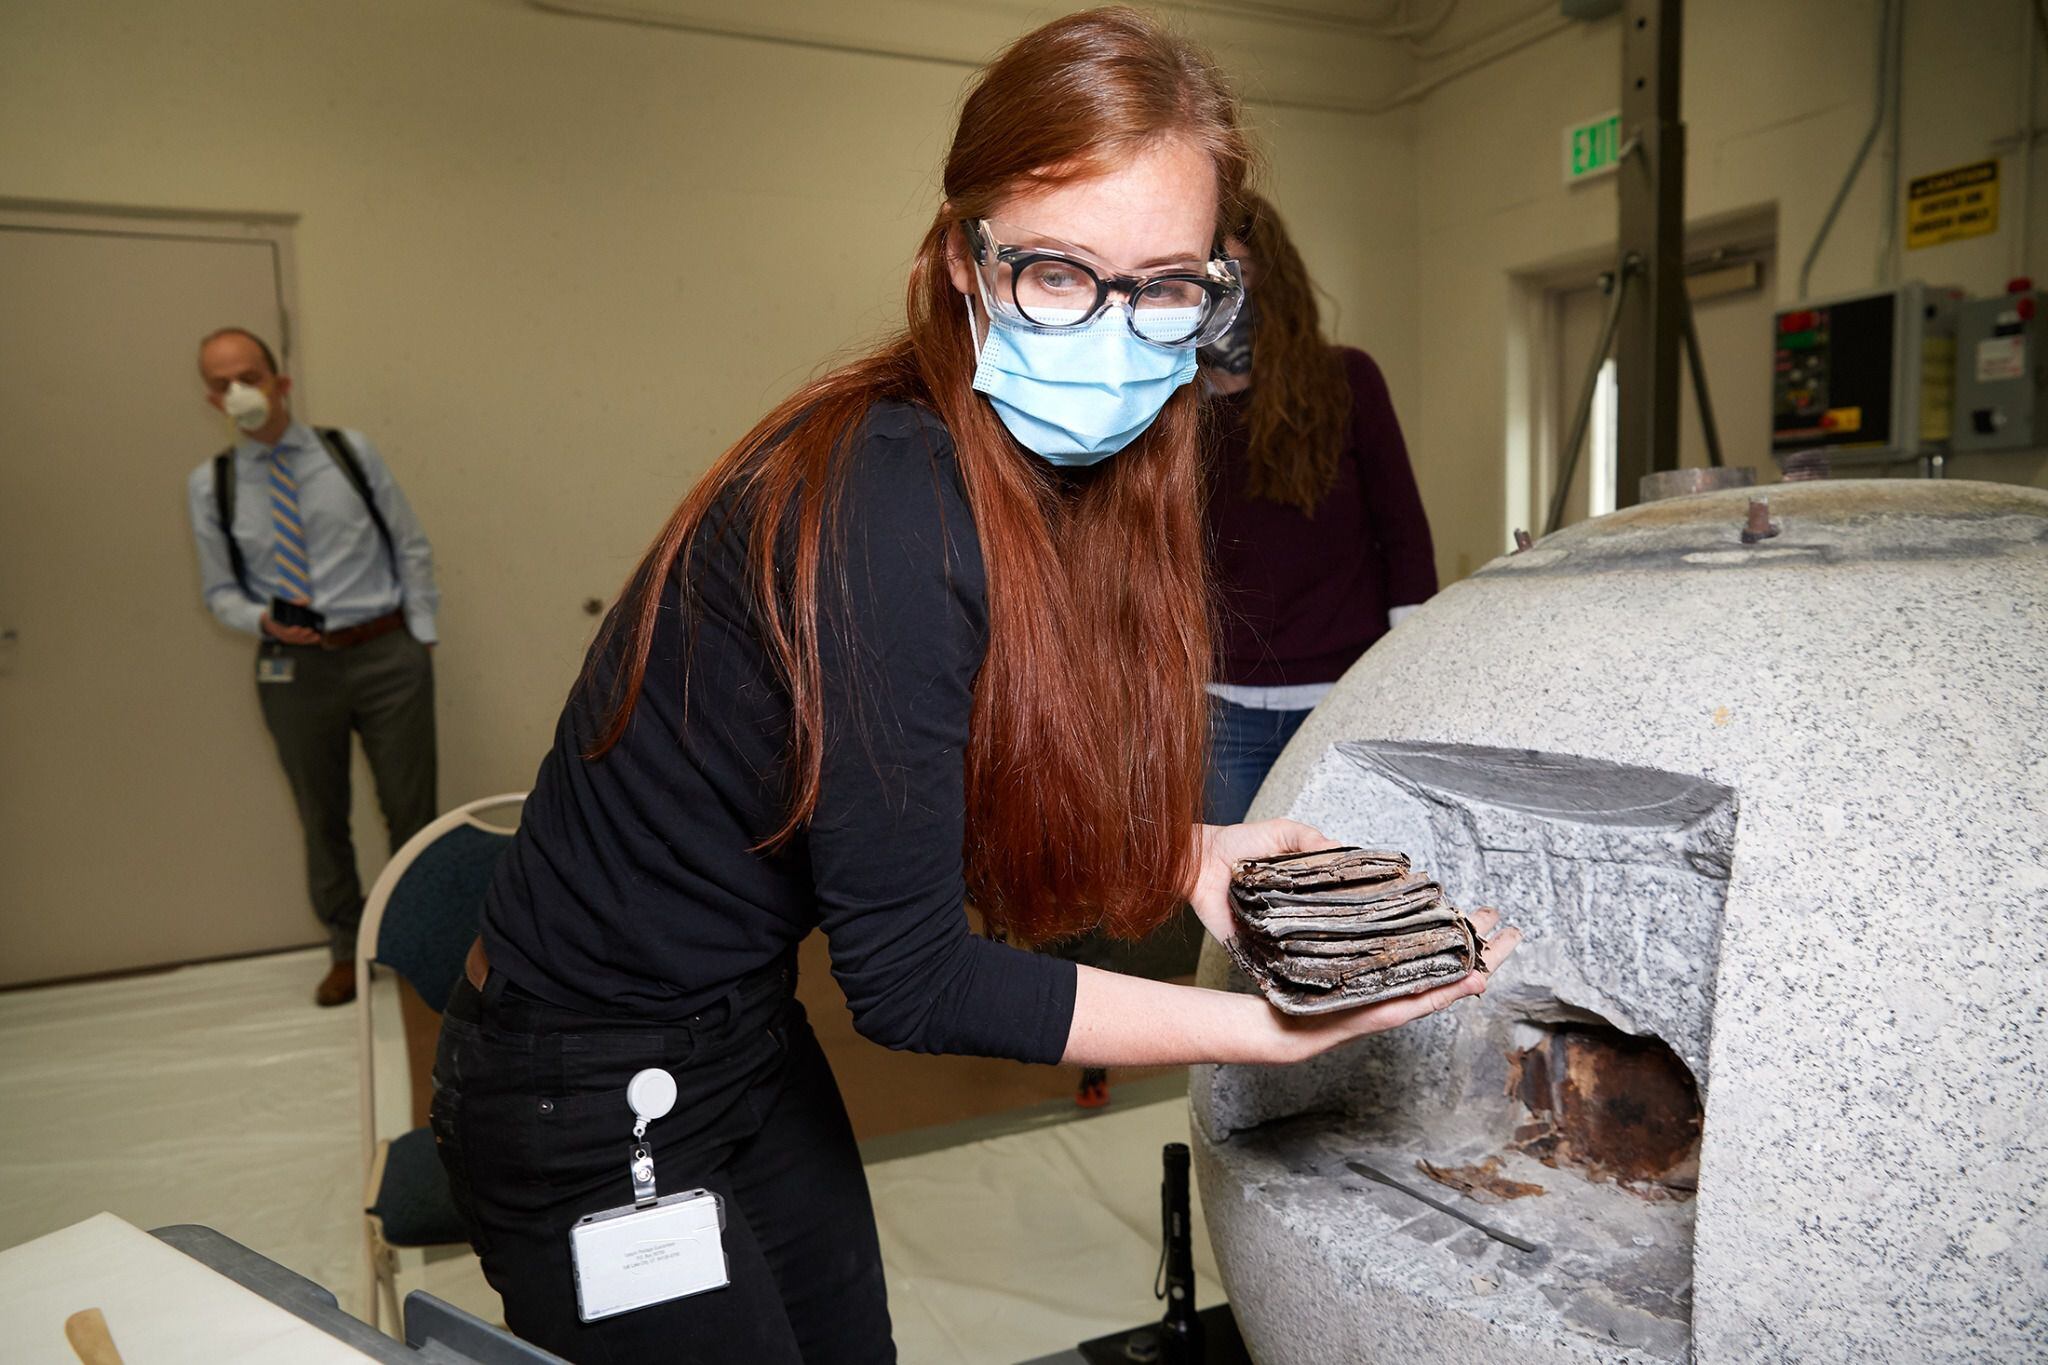 (photo courtesy The Church of Jesus Christ of Latter-day Saints) Emiline Twitchell, a conservator at the Church History Library, removes items from the capstone of the Salt Lake Temple on May 20, 2020.